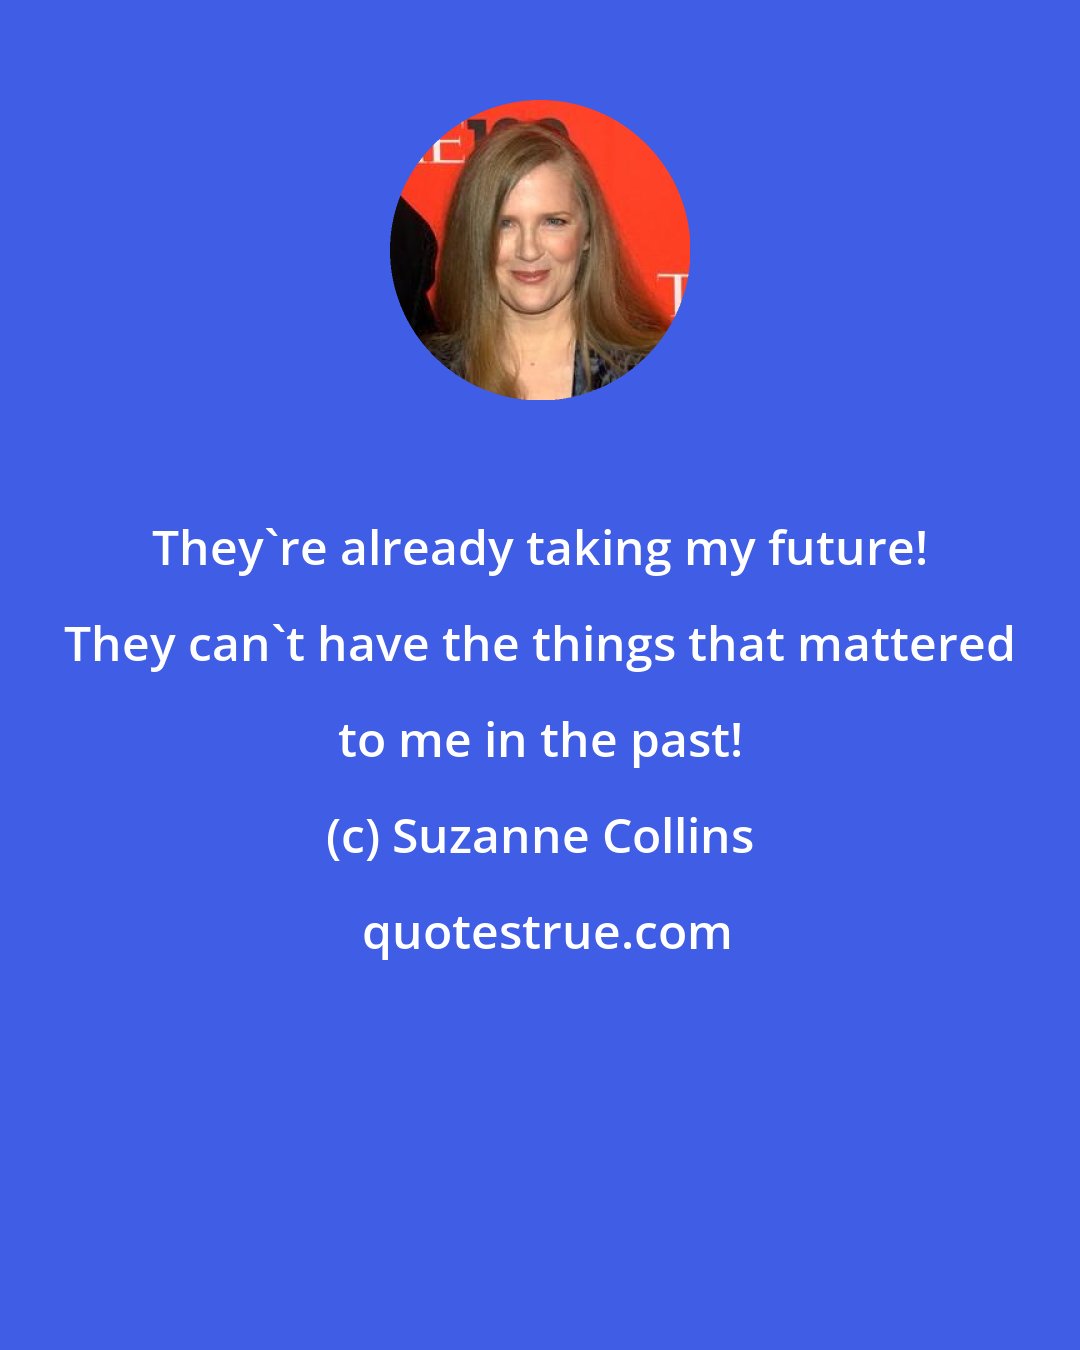 Suzanne Collins: They're already taking my future! They can't have the things that mattered to me in the past!